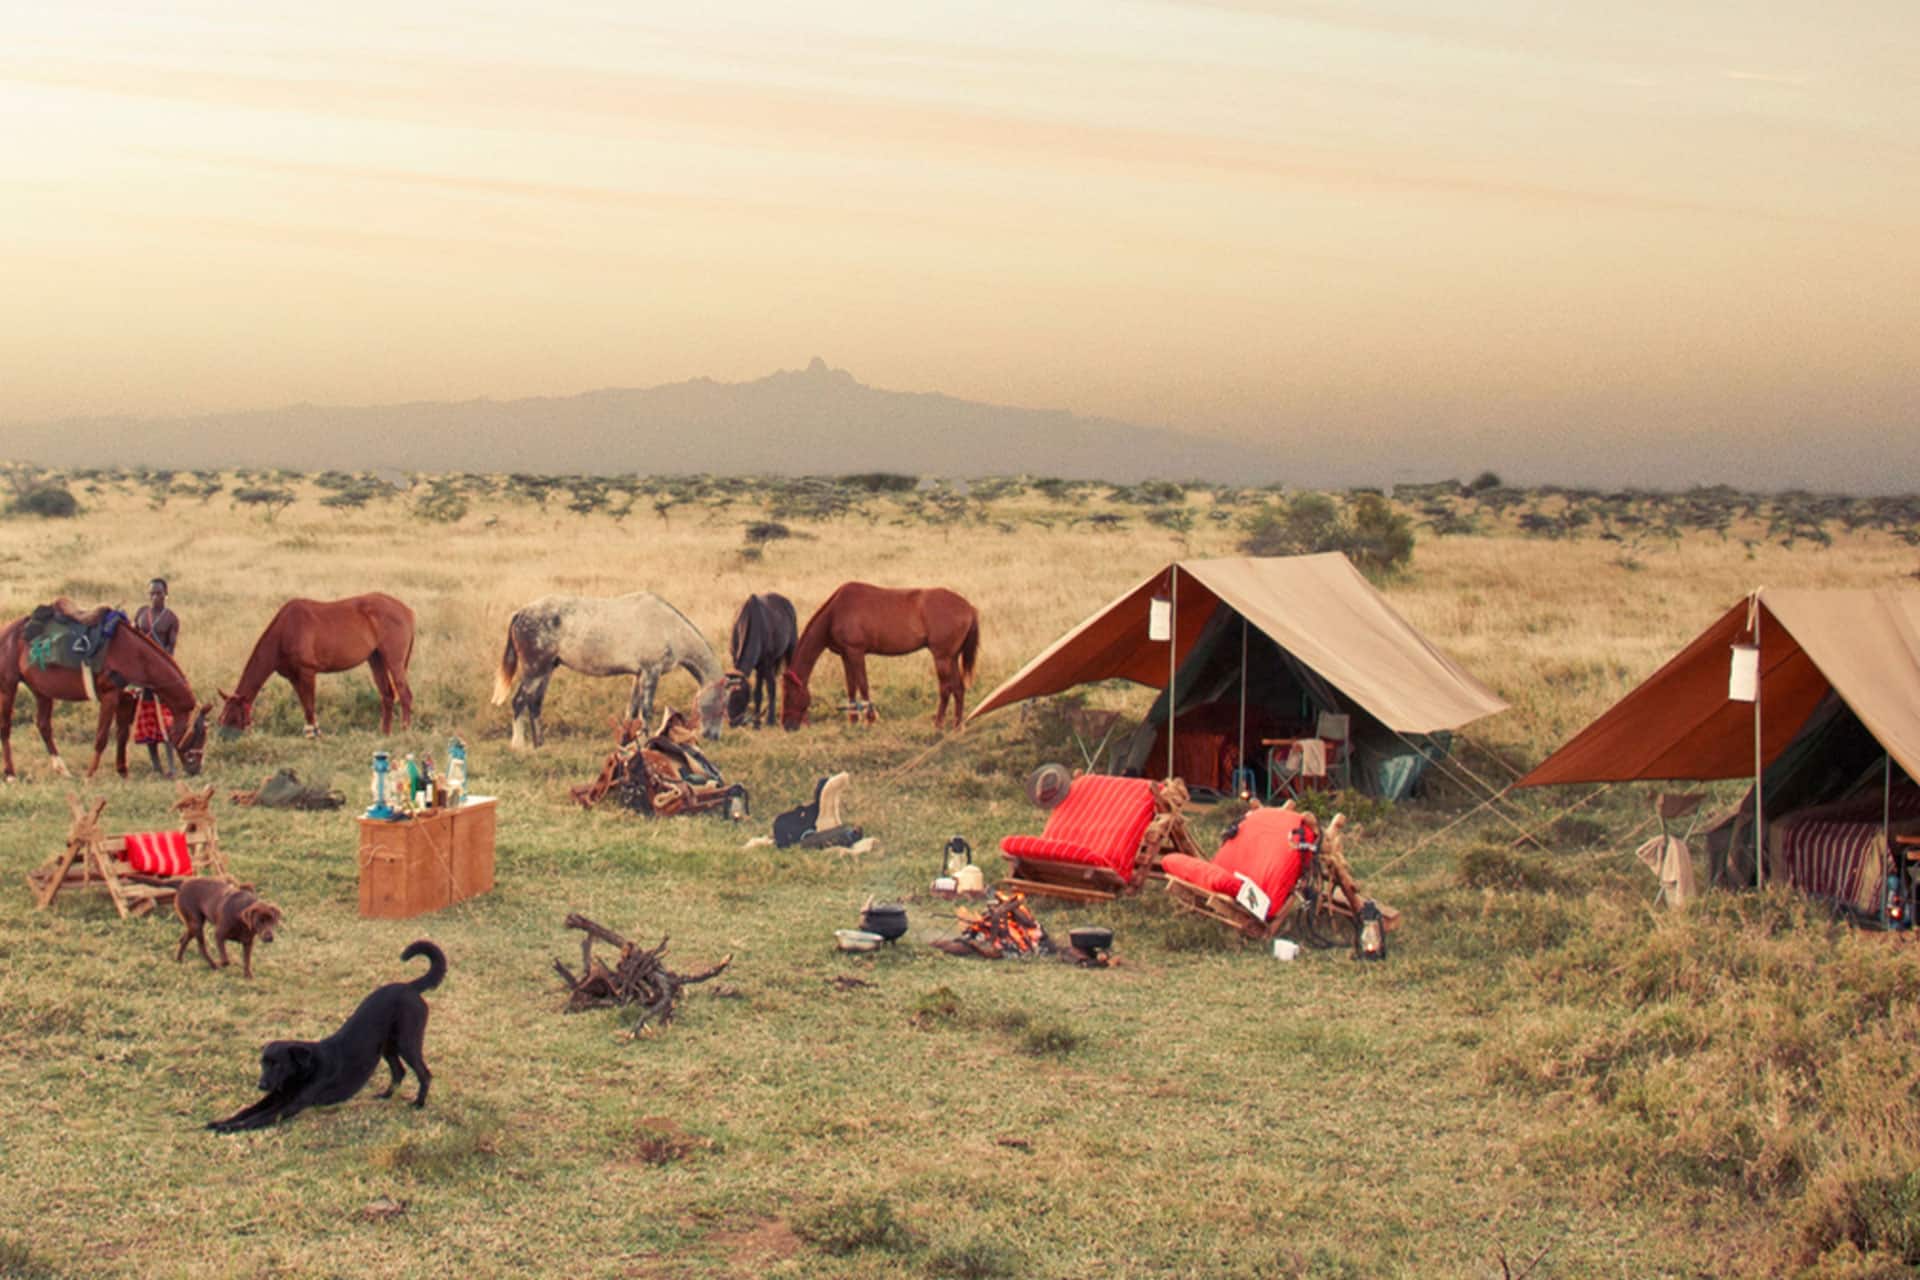 The mobile campsite at Ol Malo Nomad Camp on an African horseback safari